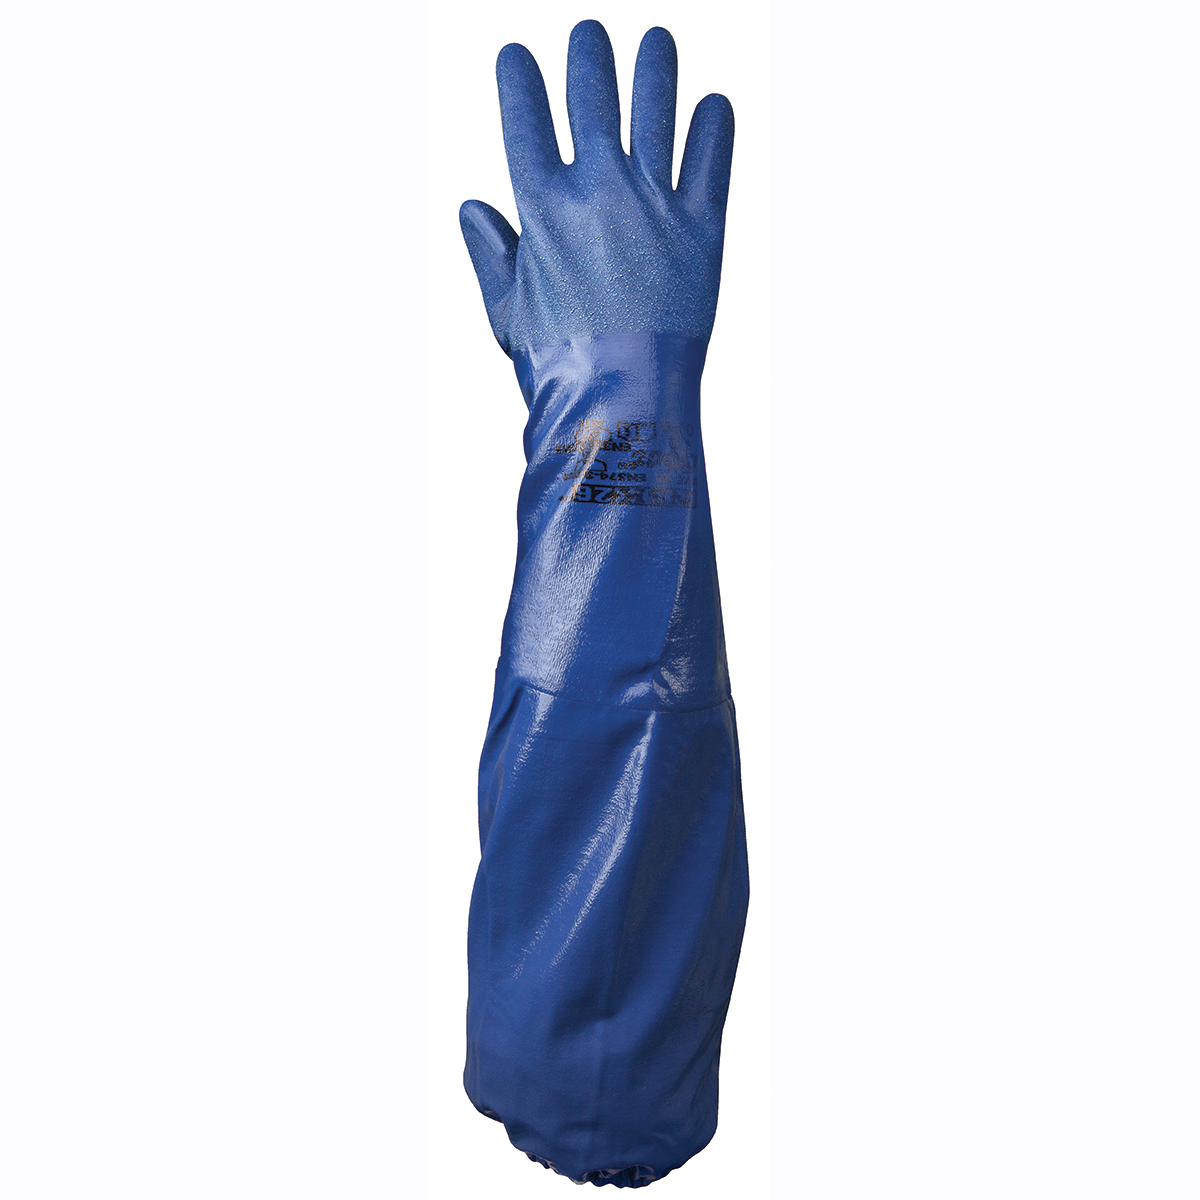 SHOWA® Size 10 Blue Cotton Lined Nitrile Chemical Resistant Gloves